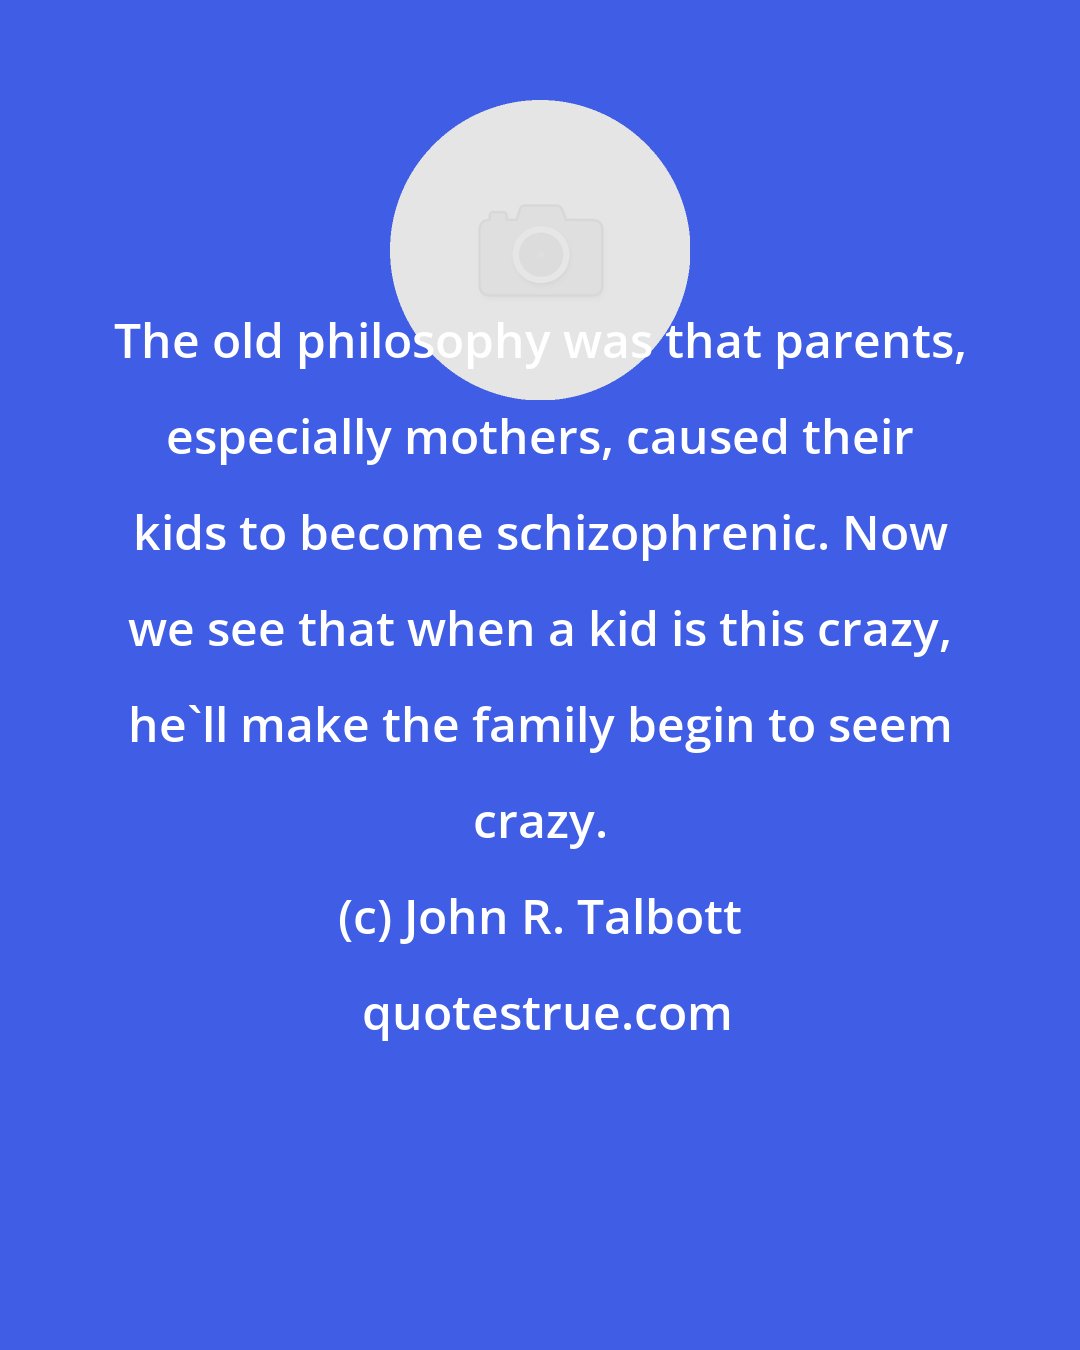 John R. Talbott: The old philosophy was that parents, especially mothers, caused their kids to become schizophrenic. Now we see that when a kid is this crazy, he'll make the family begin to seem crazy.